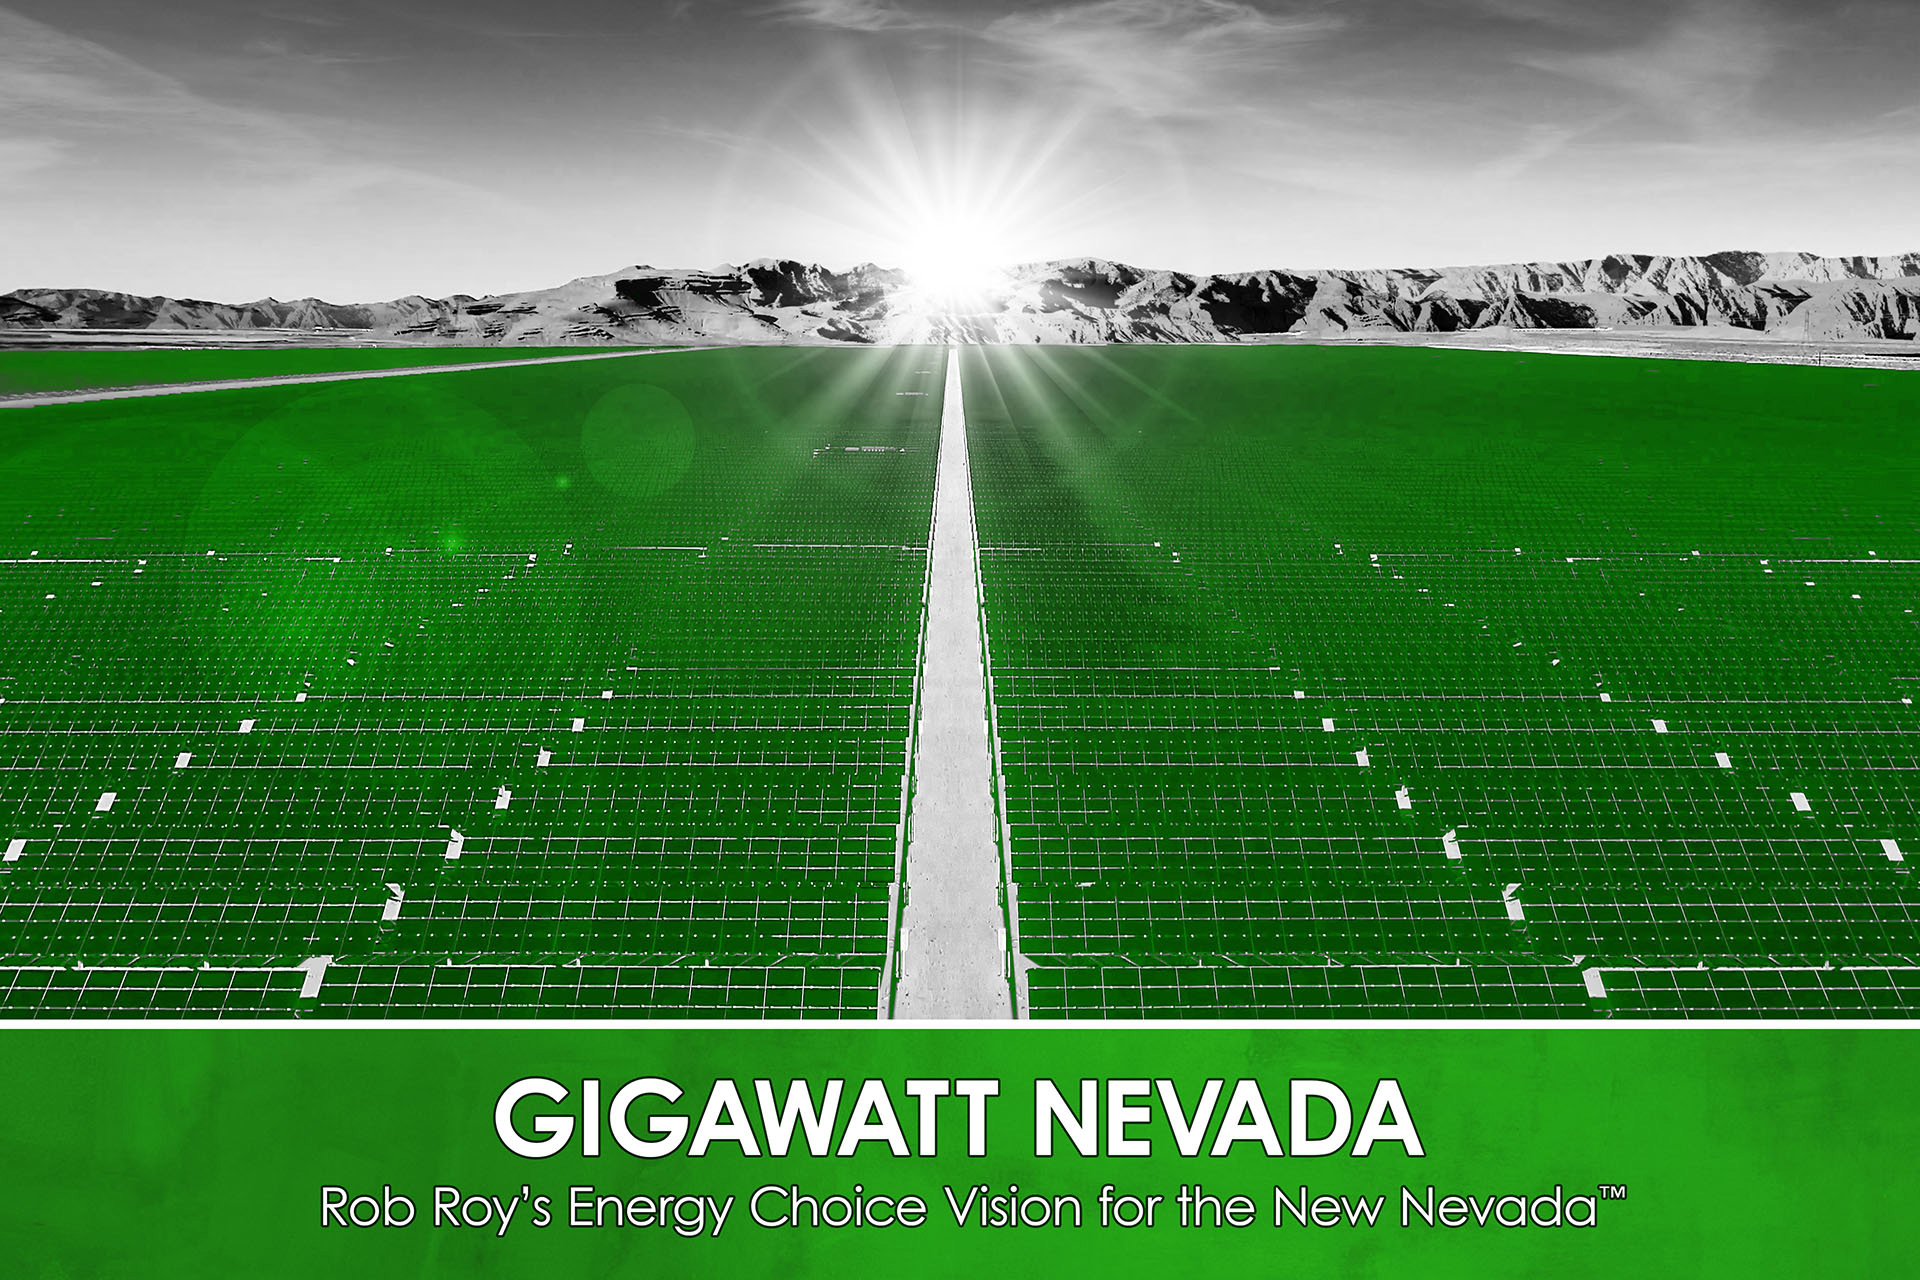 Switch Announces Rob Roy’s Gigawatt Nevada, the Largest Solar Project in the United States